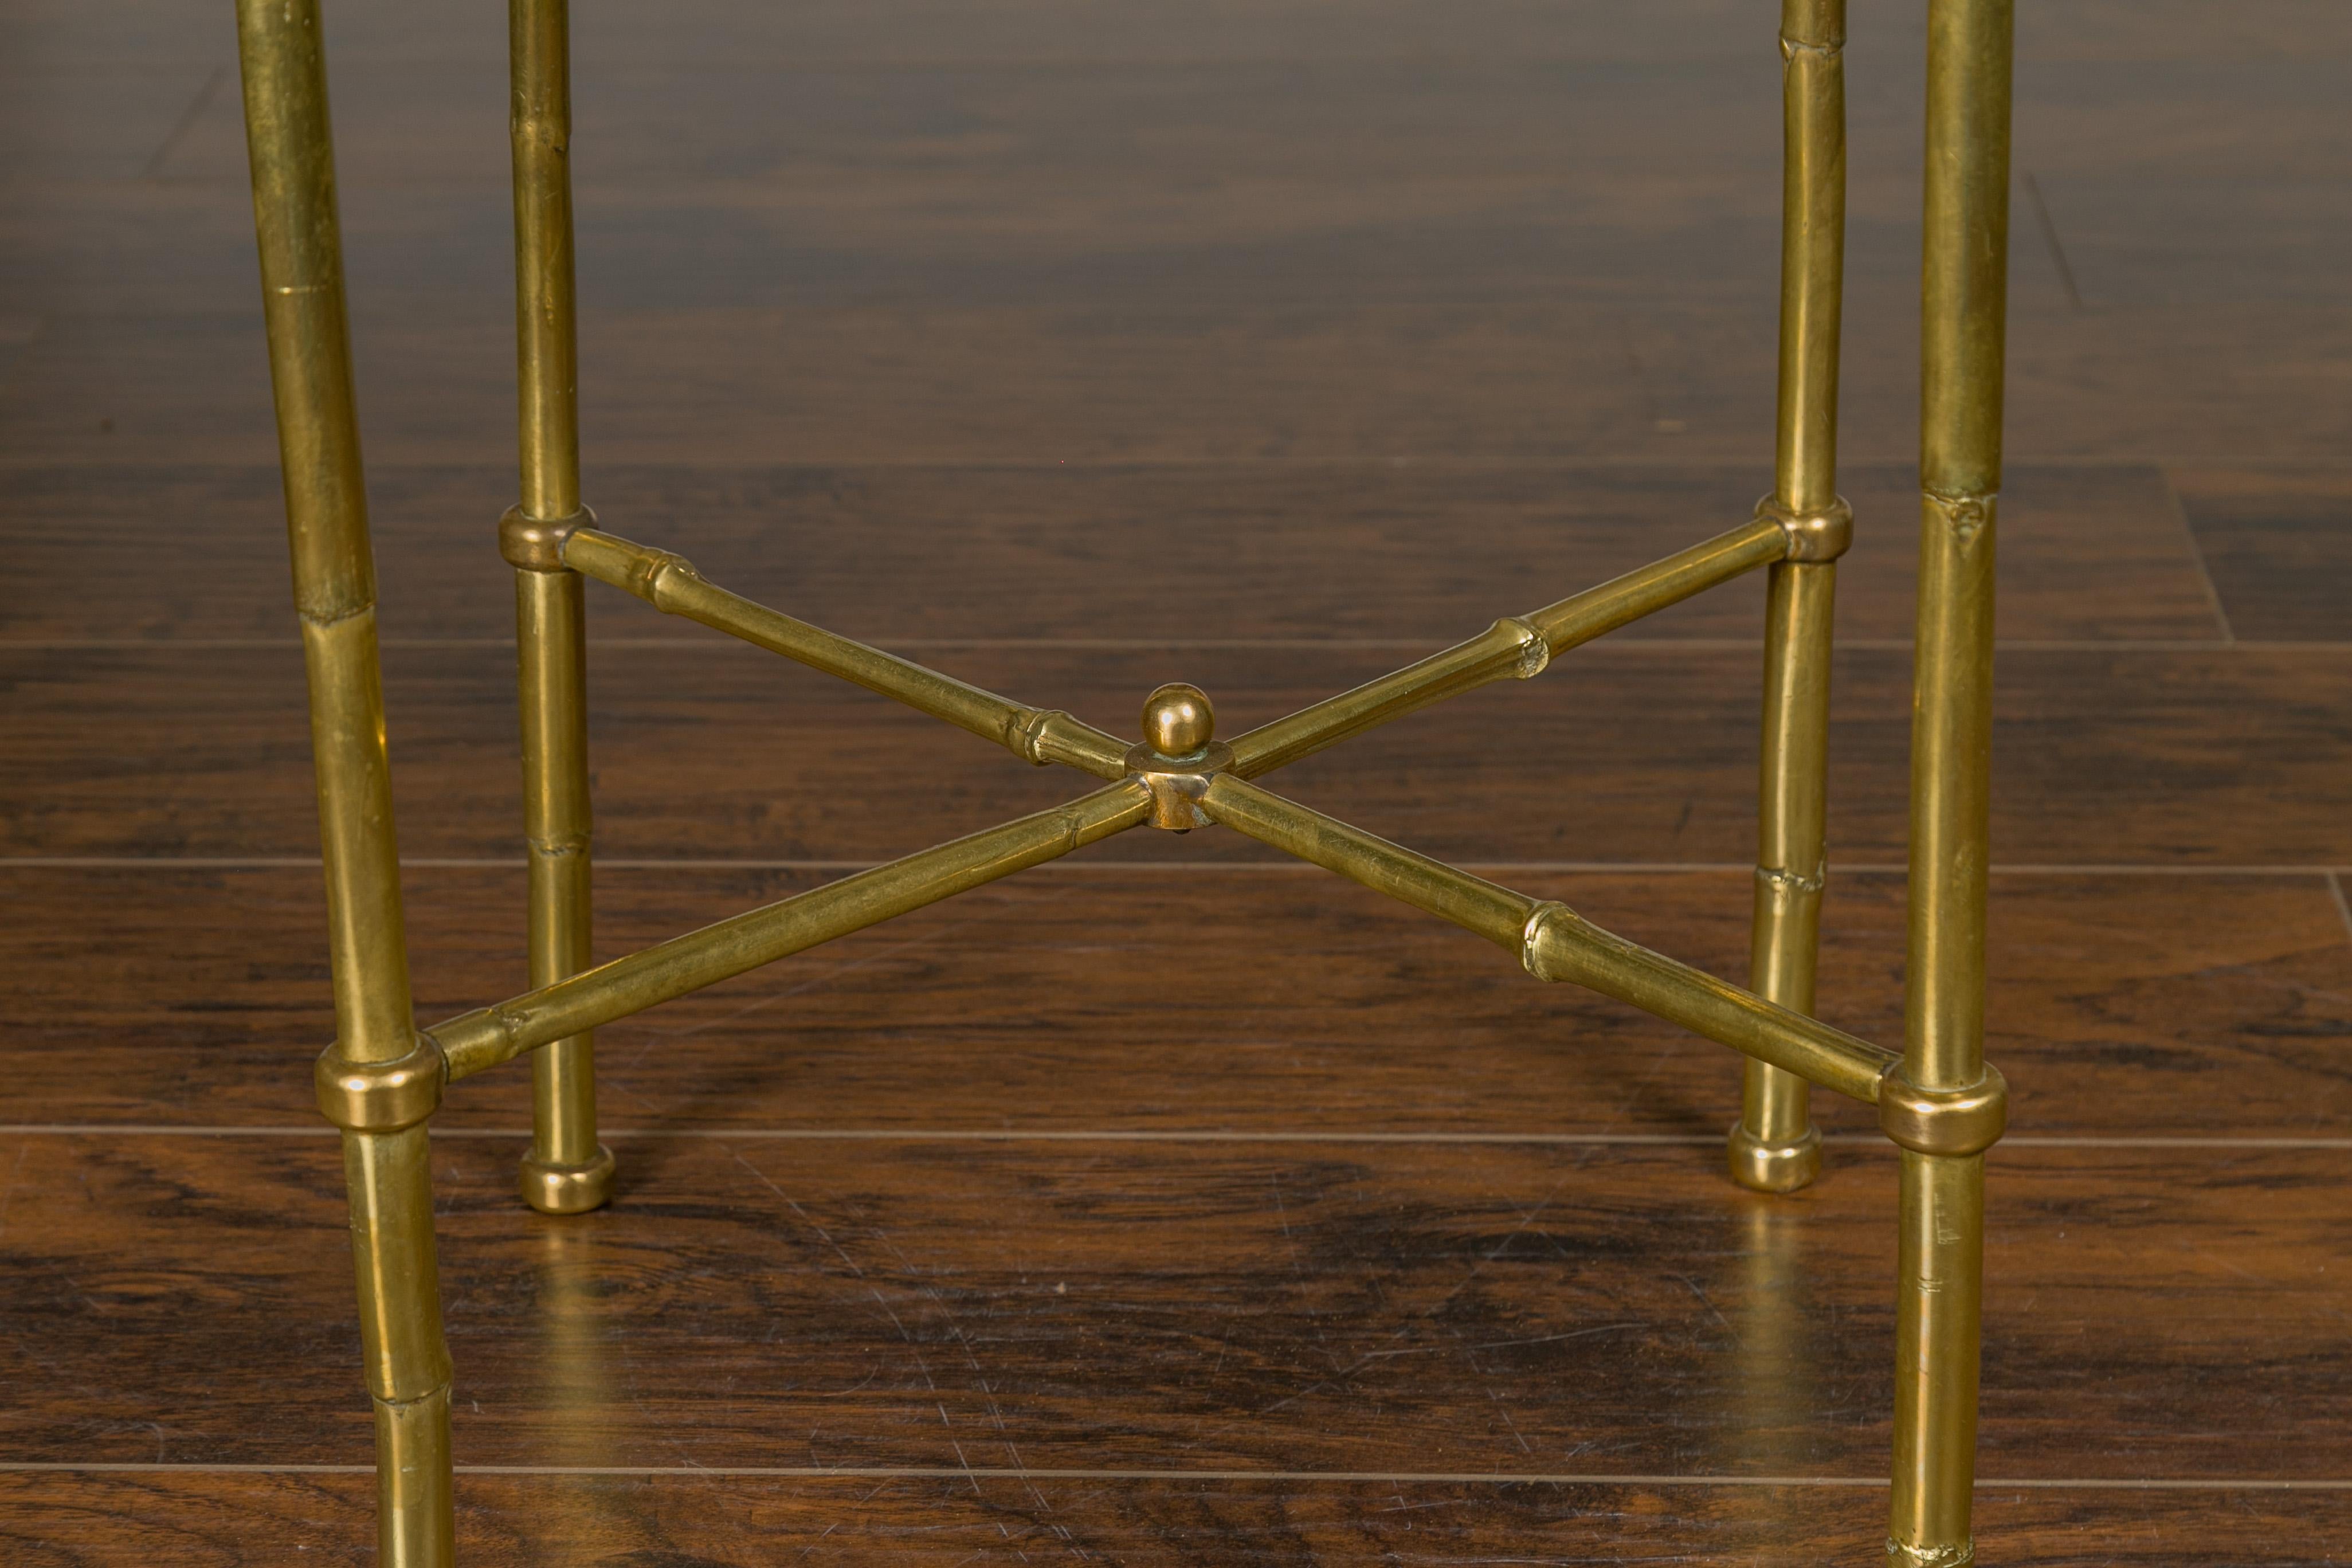 Italian Midcentury Brass Bamboo-Inspired Side Table with Distressed Glass Top For Sale 1